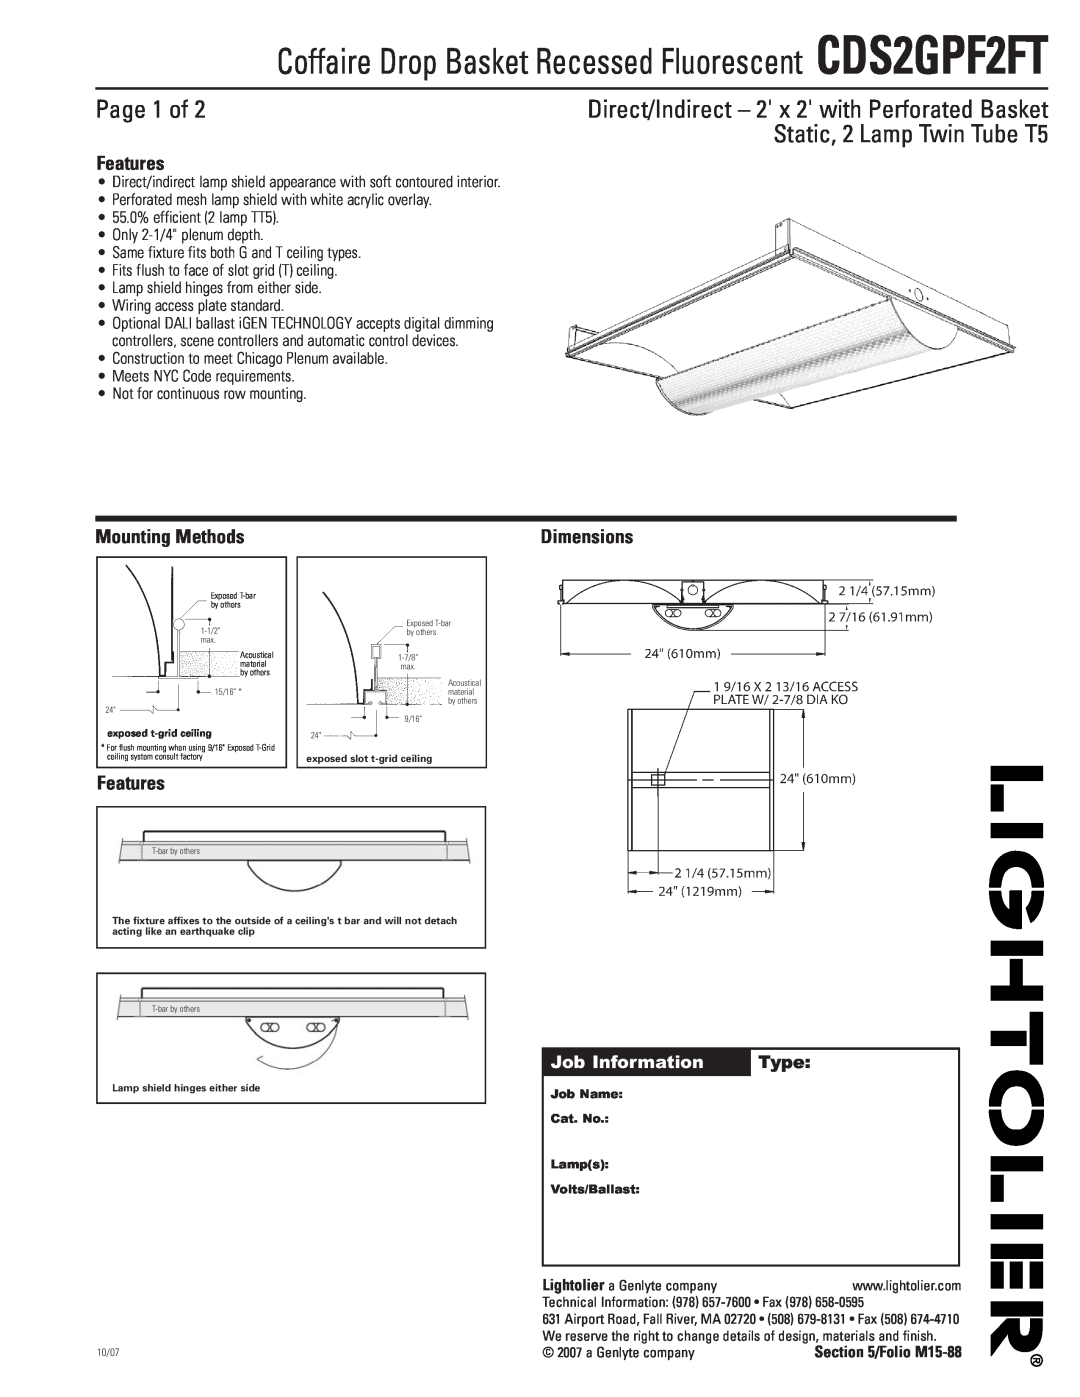 Lightolier CDS2GPF2FT dimensions Page 1 of, Features, Mounting Methods, Job Information, Type, Dimensions 